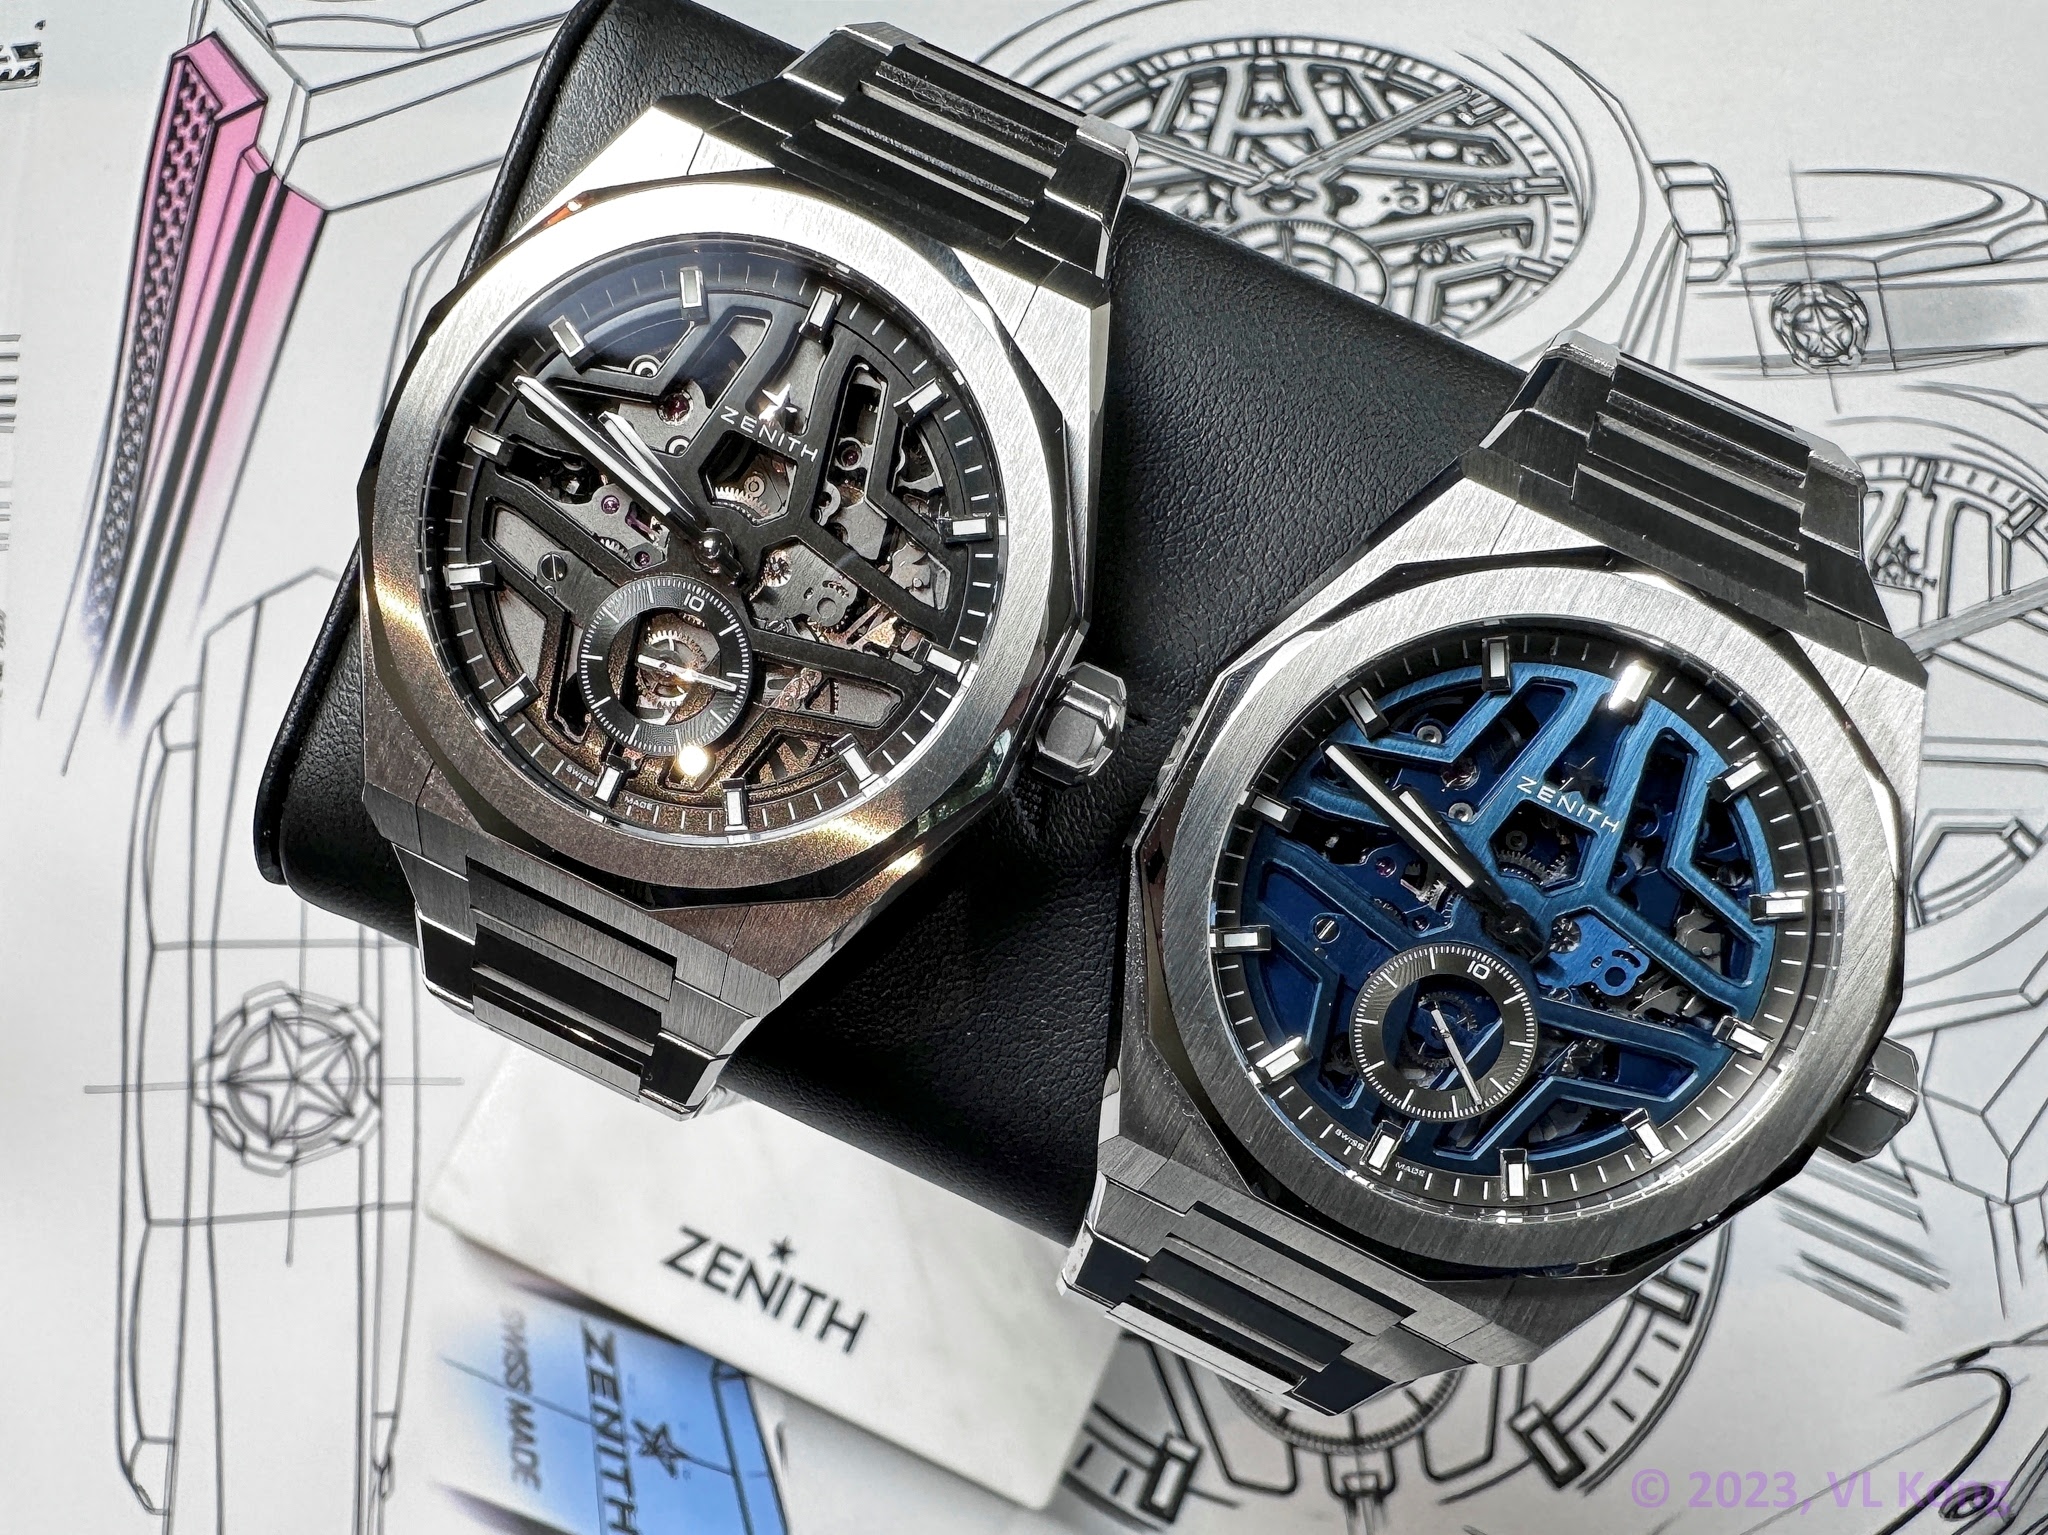 Zenith's New Launches at LVMH Watch Week 2023 